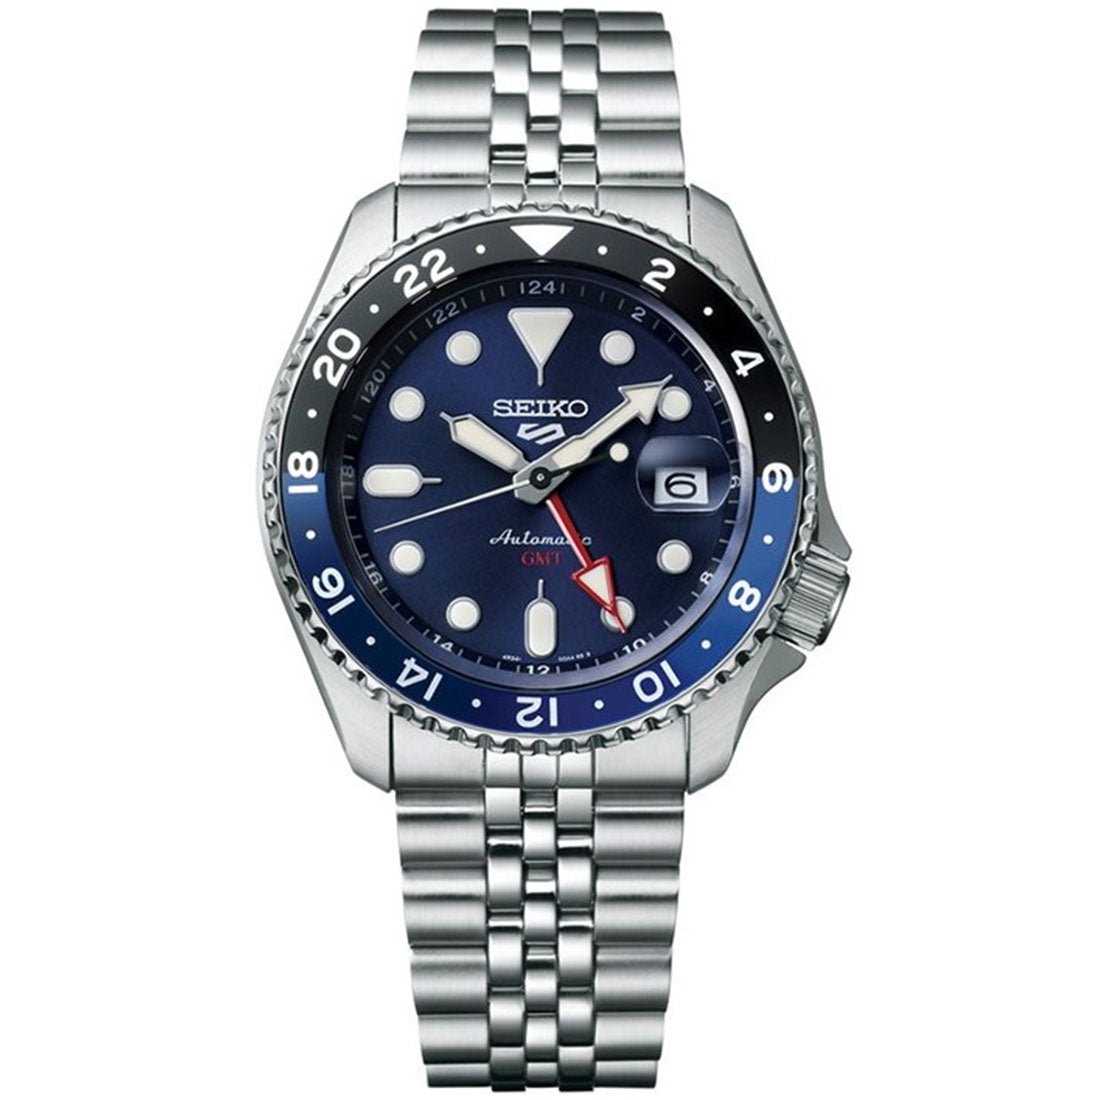 Seiko 5 Sports JDM SBSC003 GMT Automatic Watch (PRE-ORDER